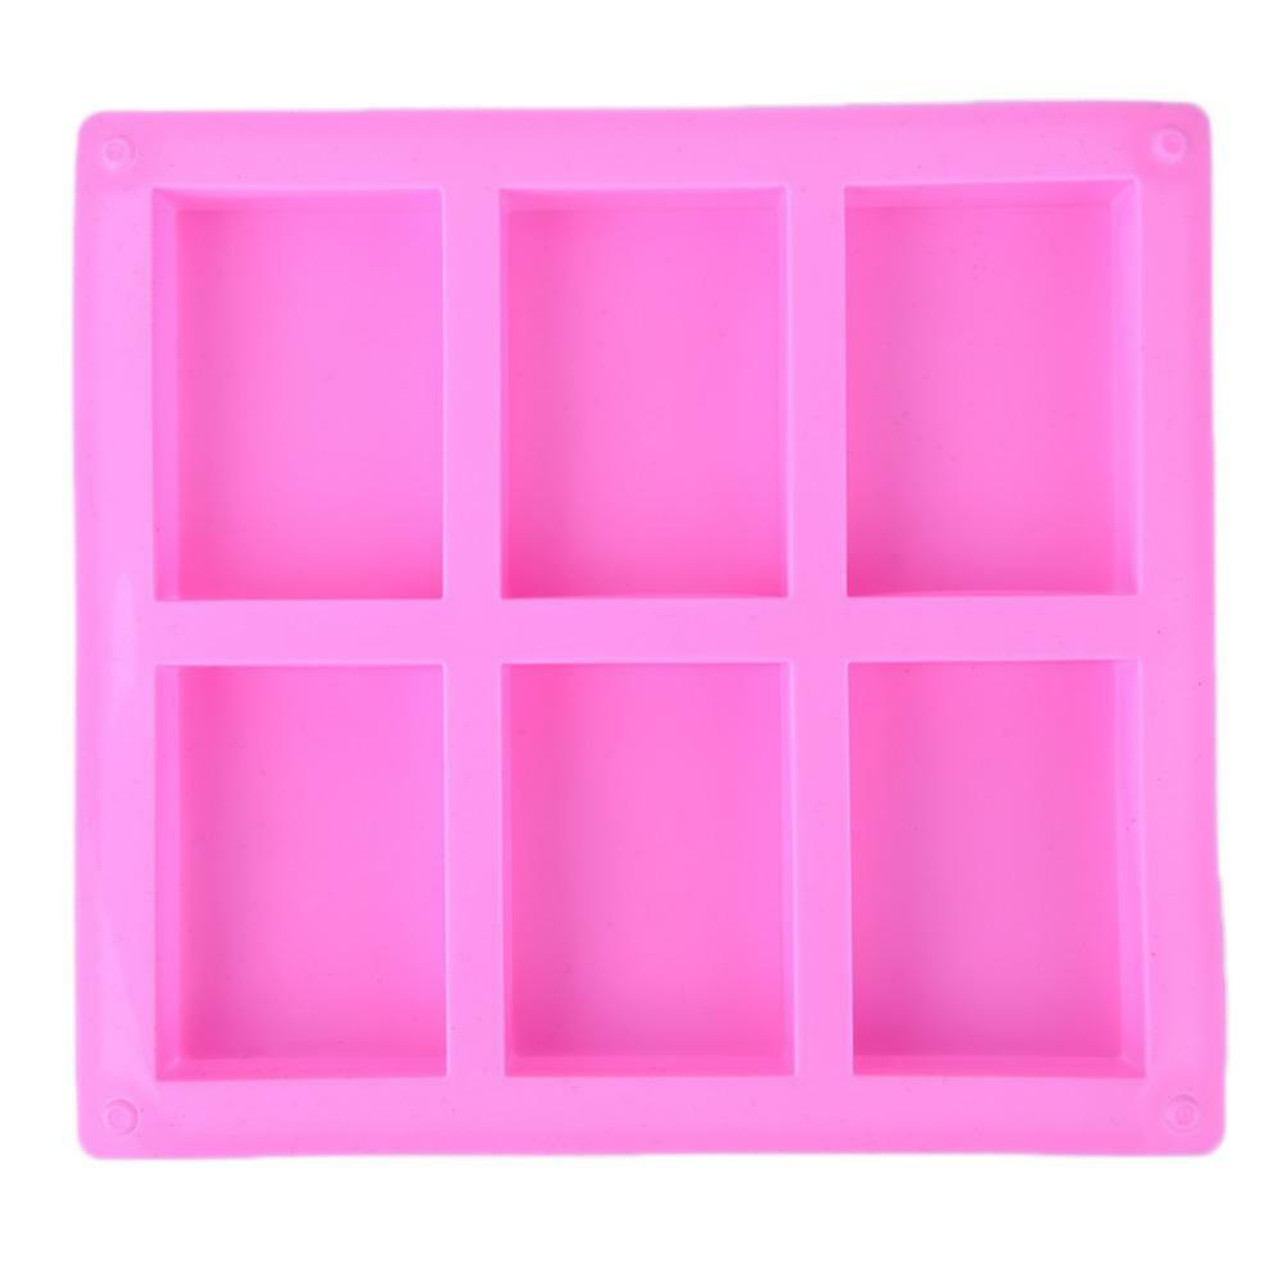 https://cdn11.bigcommerce.com/s-q86nctjasv/images/stencil/1280x1280/products/1507/2776/rectangle-silicone-wax-mold-lappesbeesupply__03083.1691036985.jpg?c=1